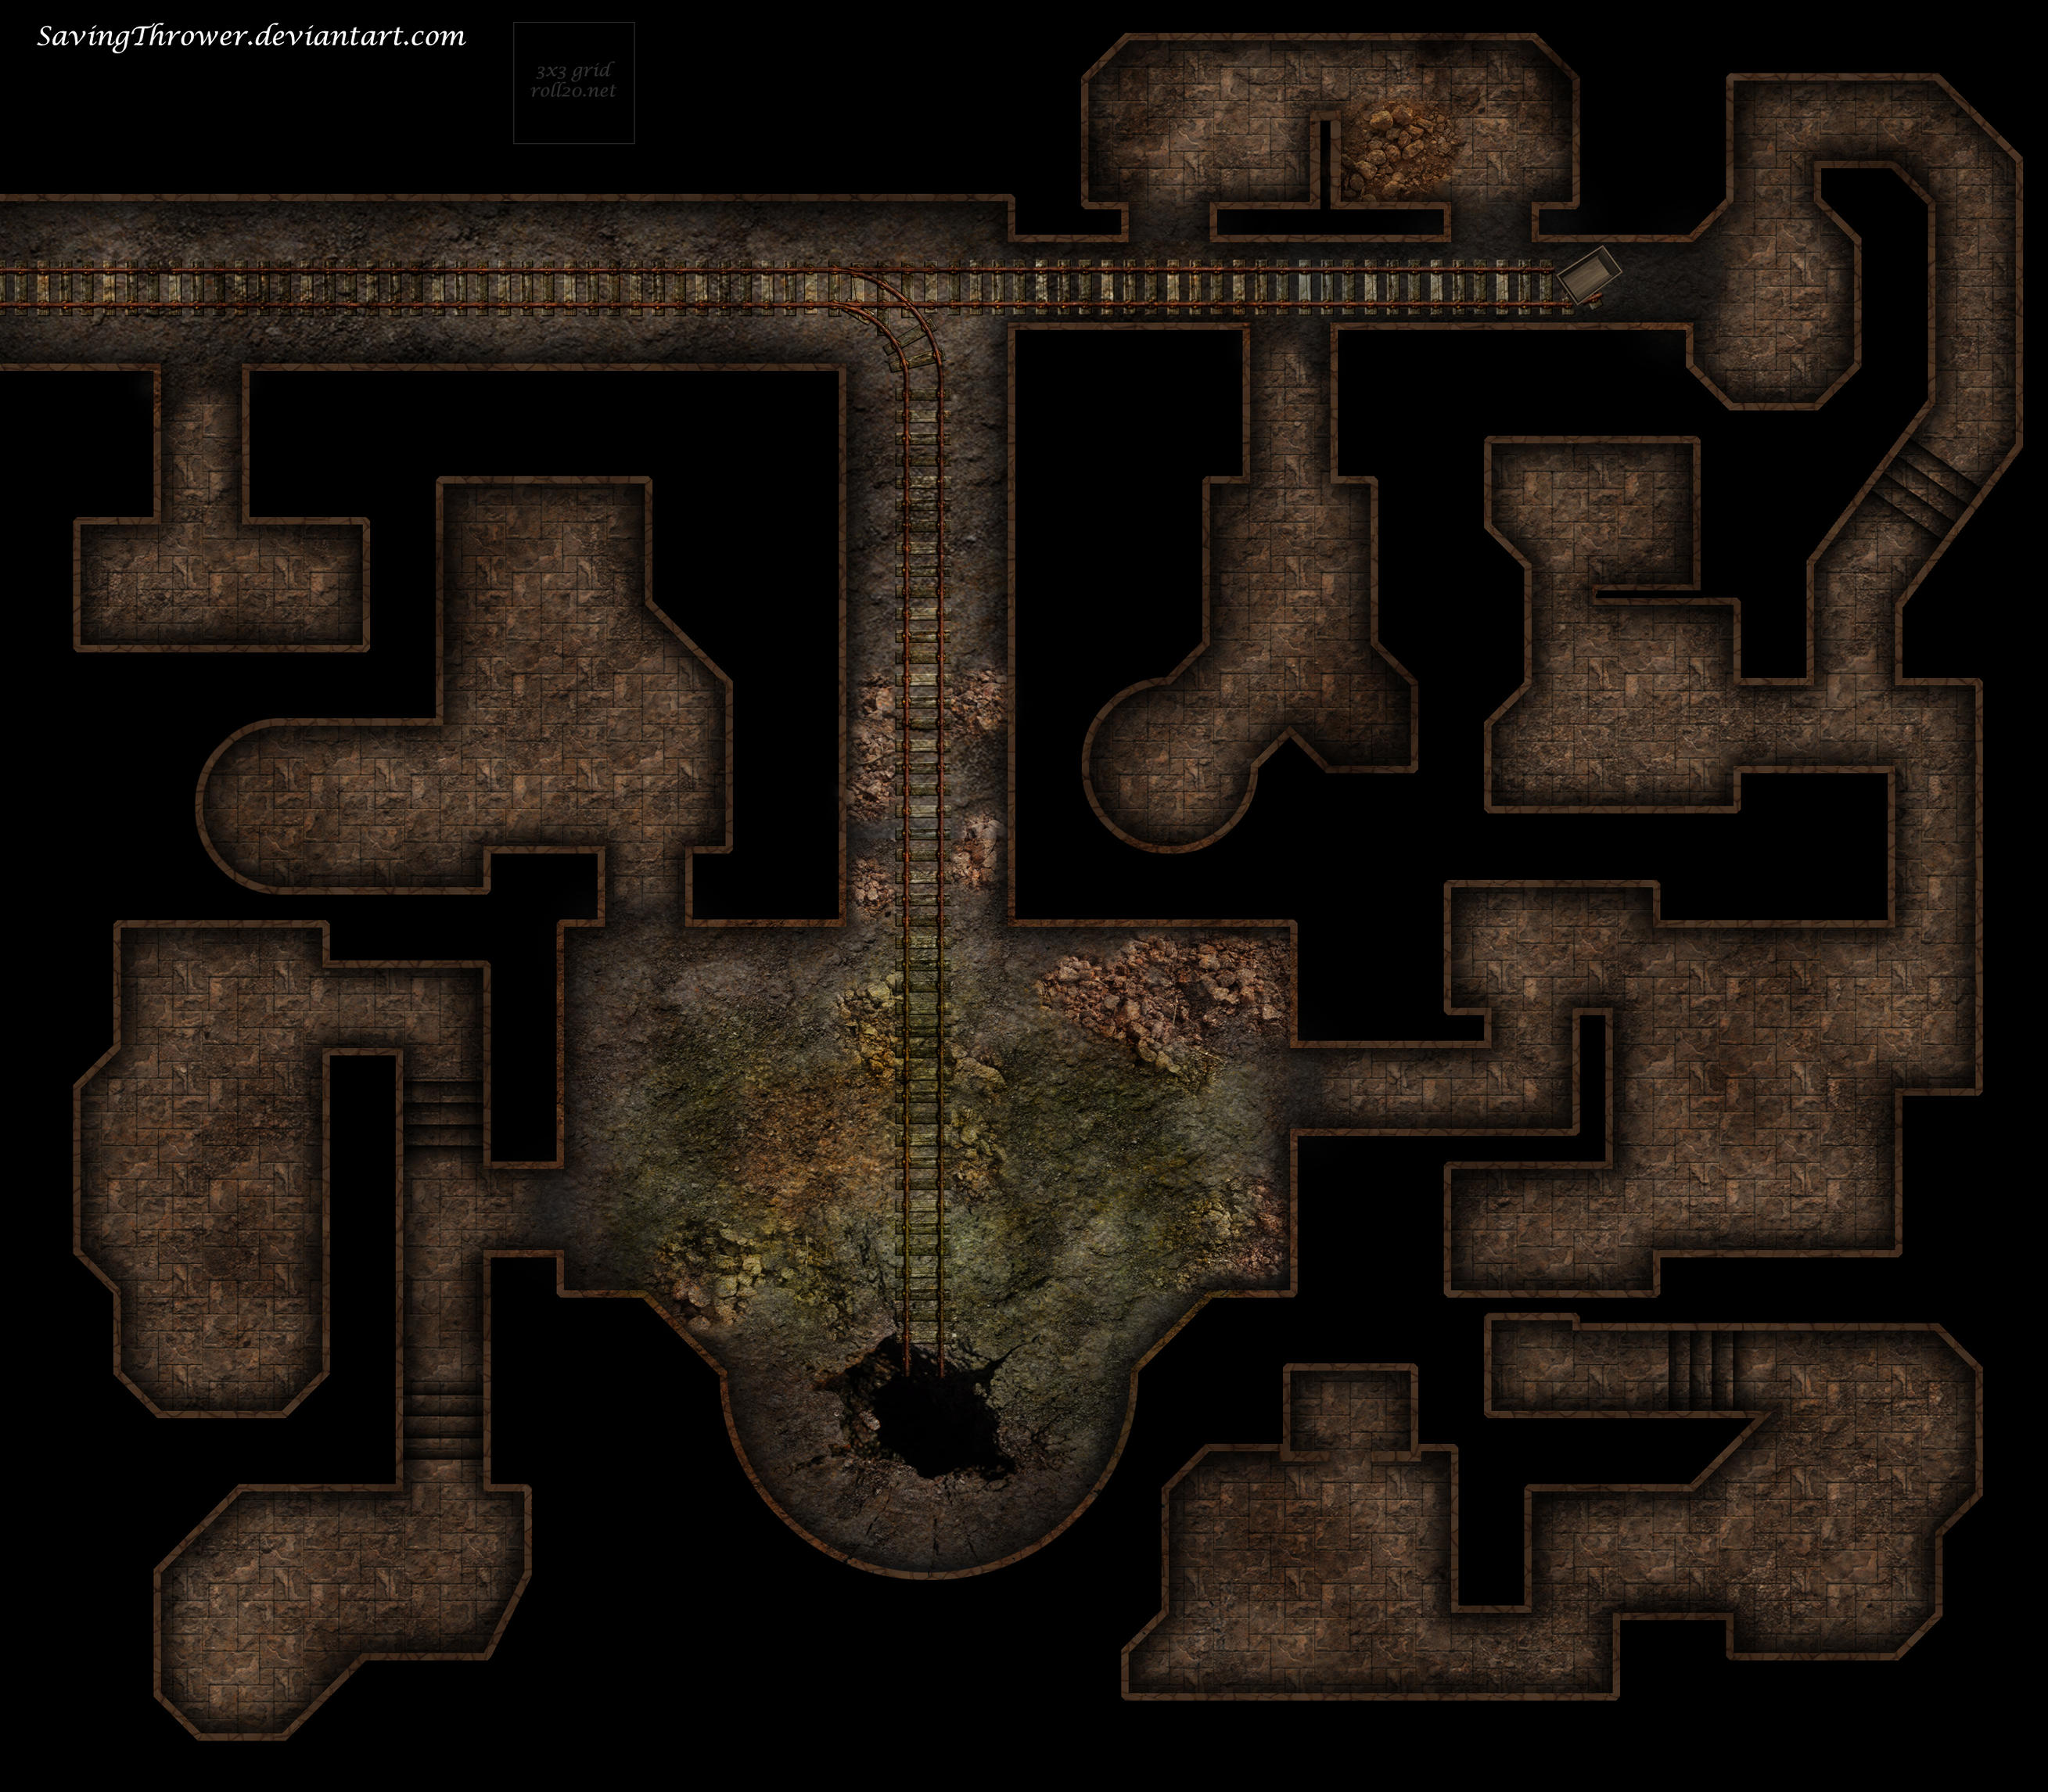 Clean mine dungeon battlemap for DnD / Roll20 by SavingThrower on